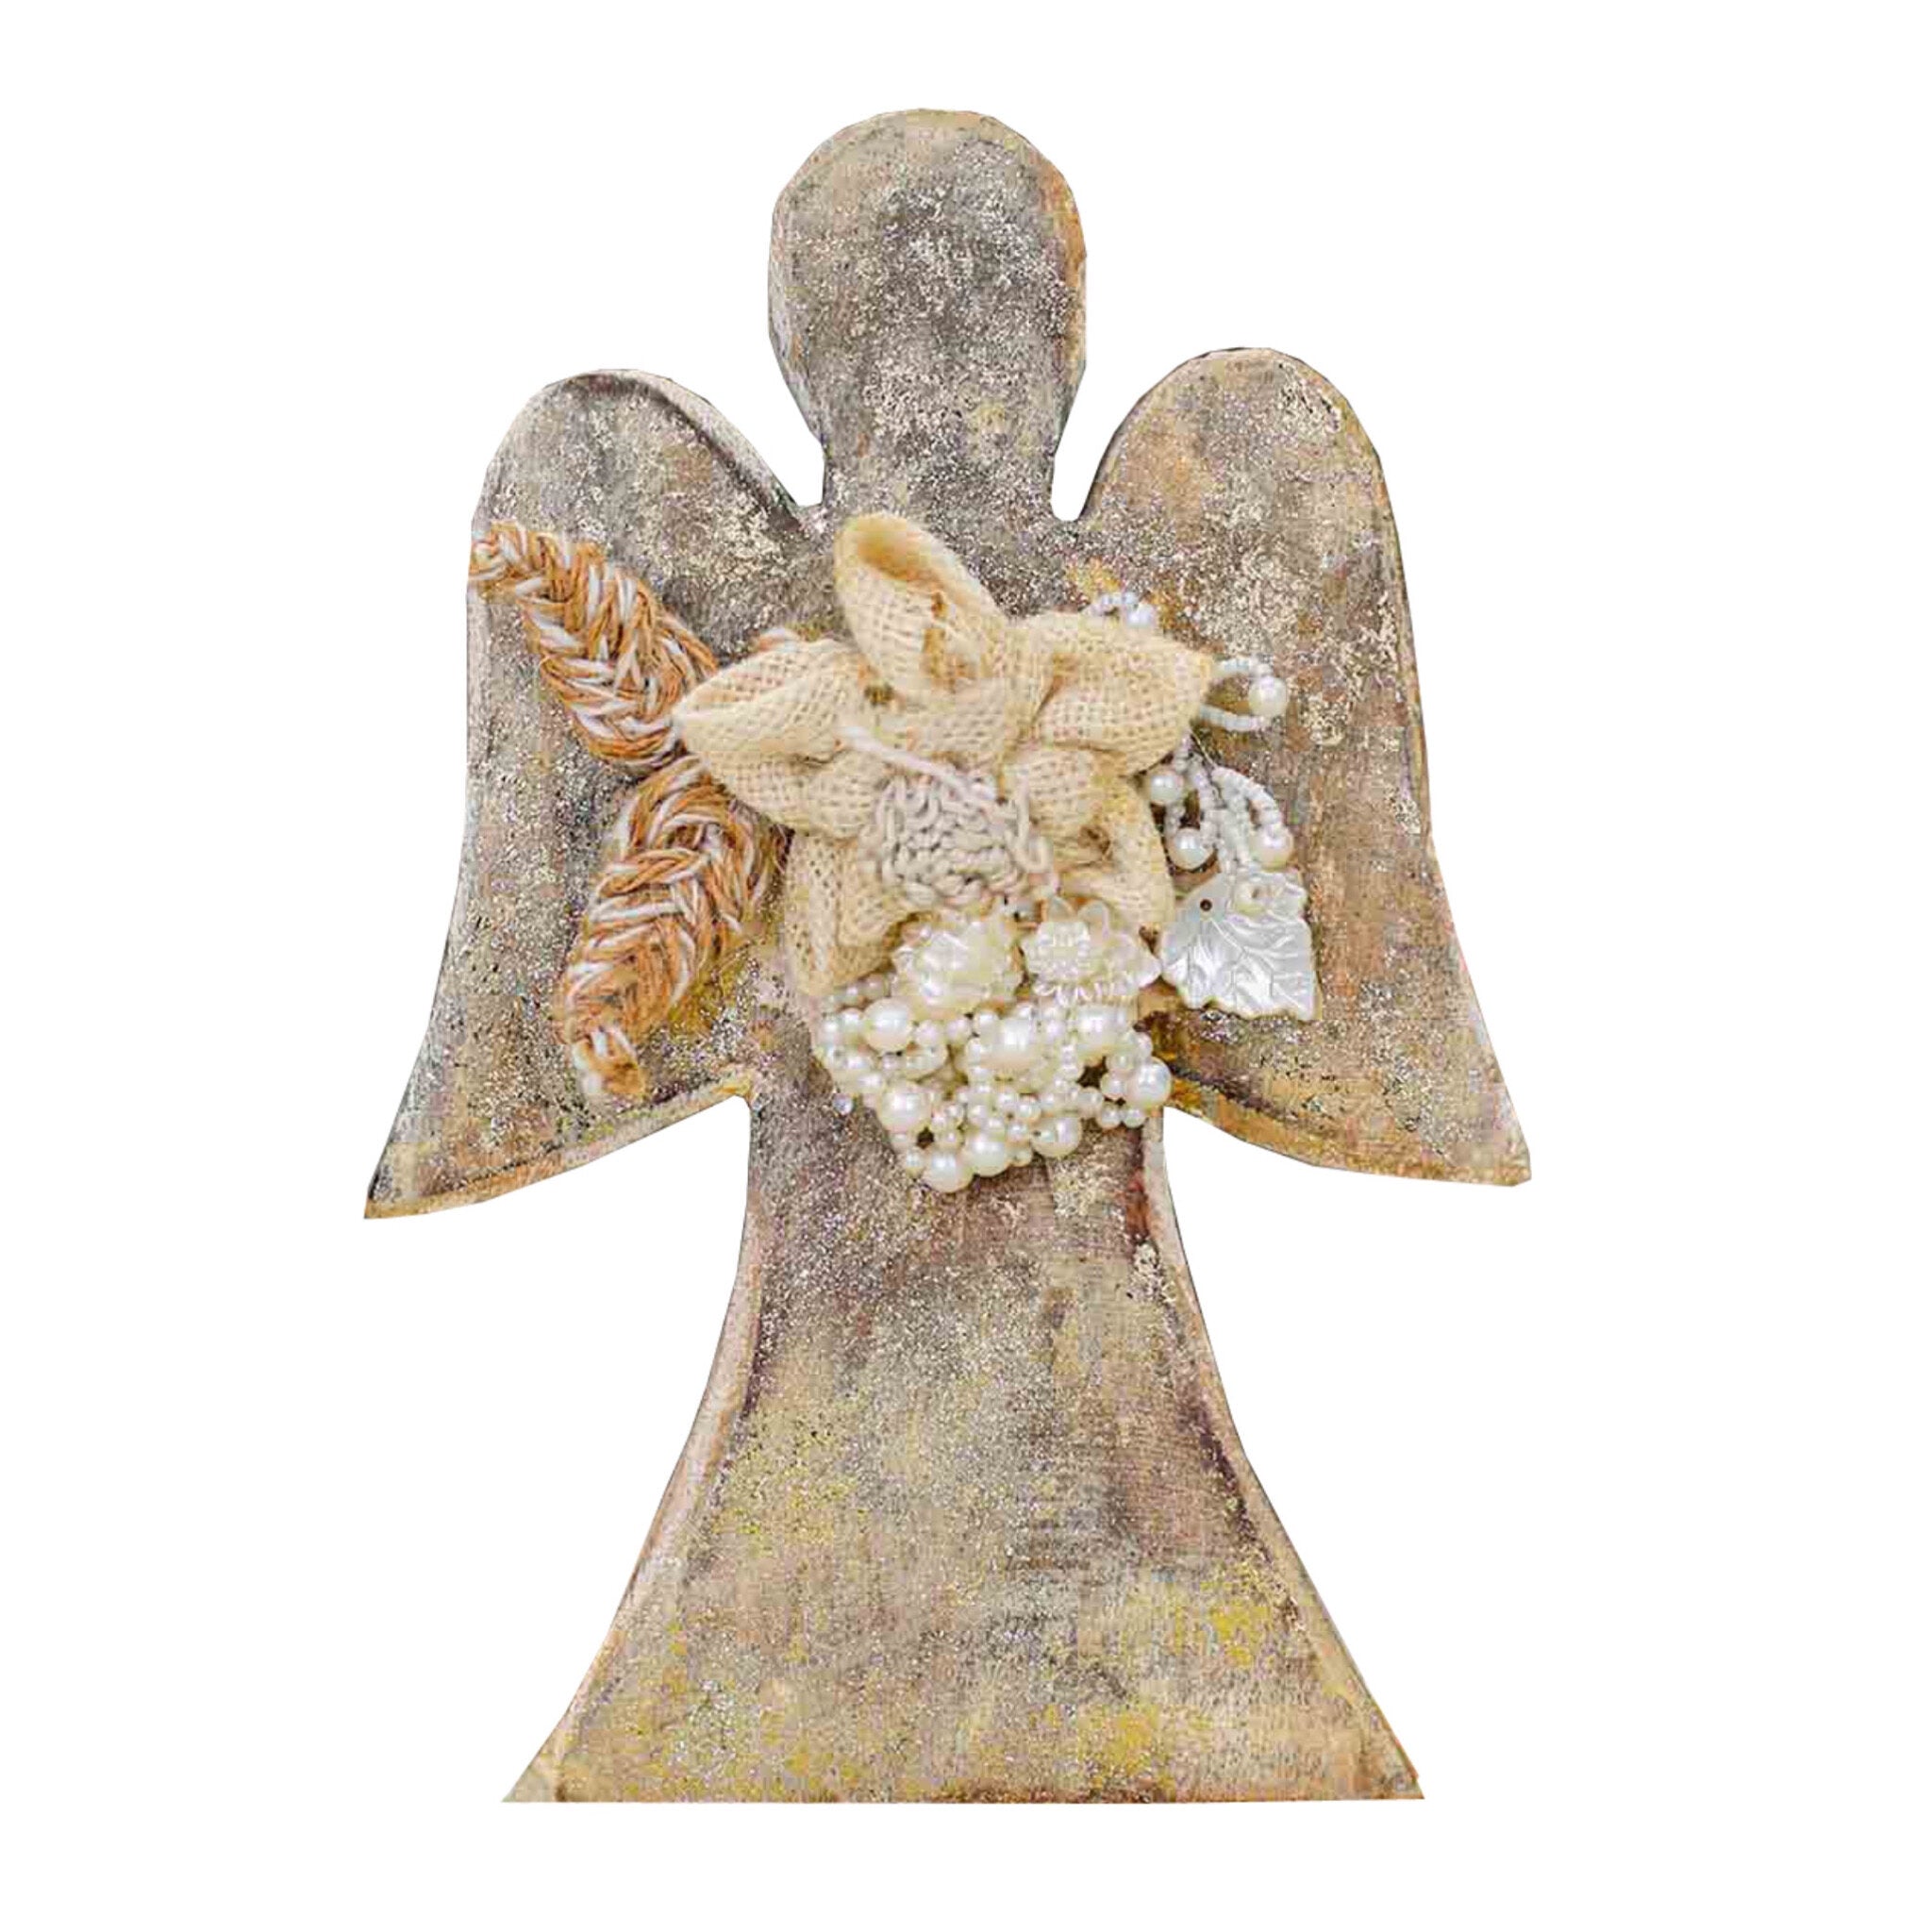 Earth Angel Wood Sculpture in White